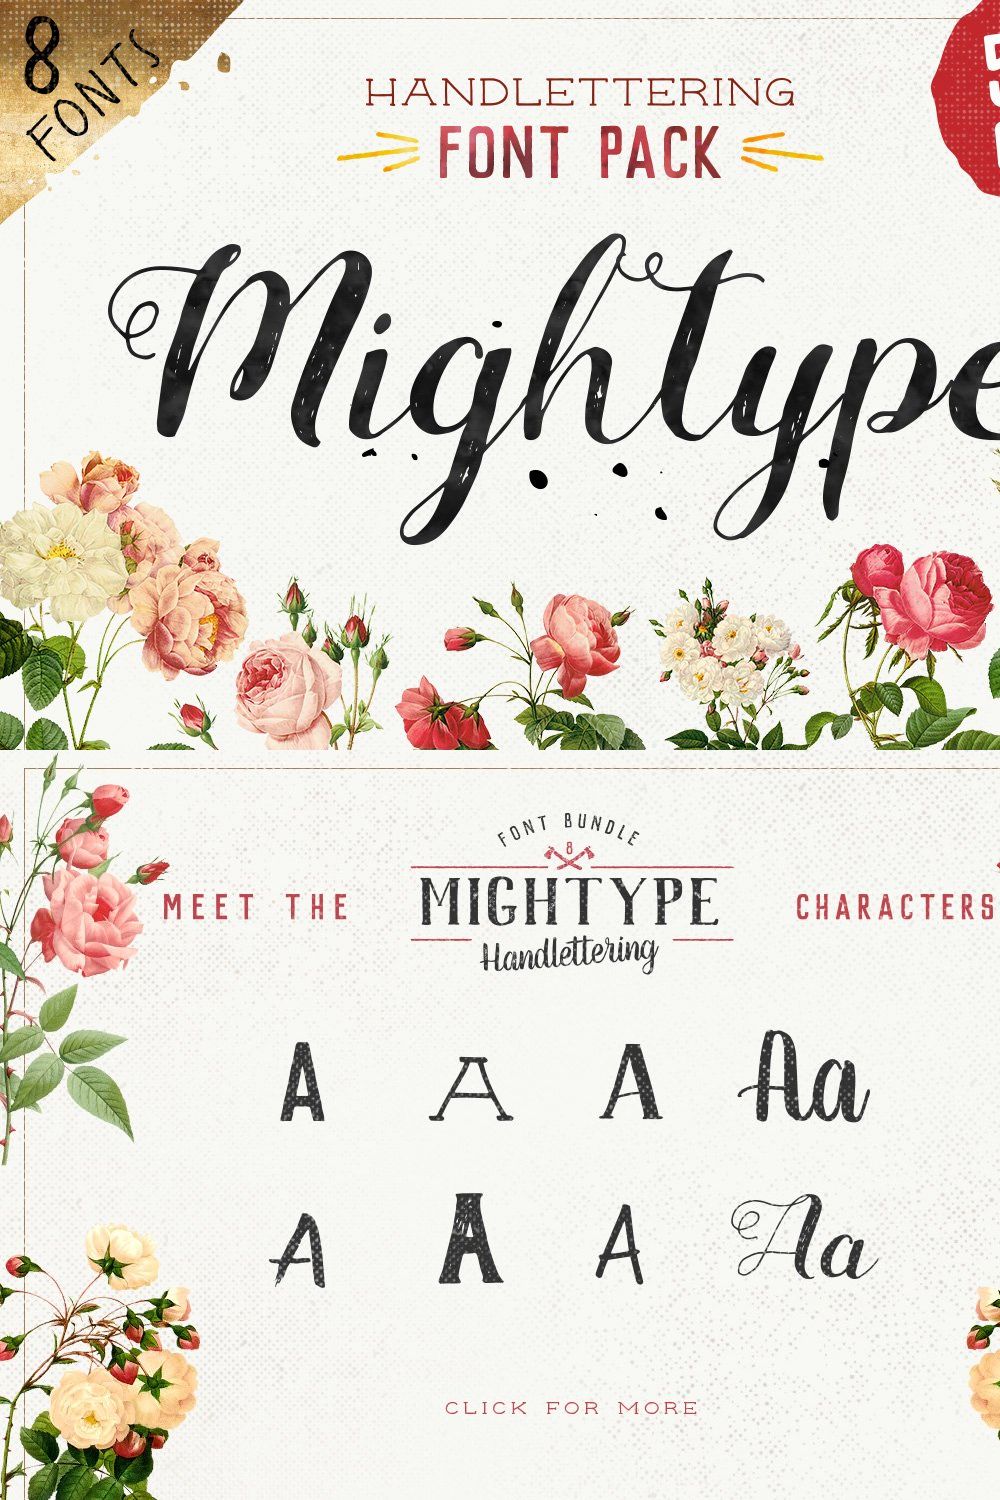 Mightype FontPack Handlettering pinterest preview image.